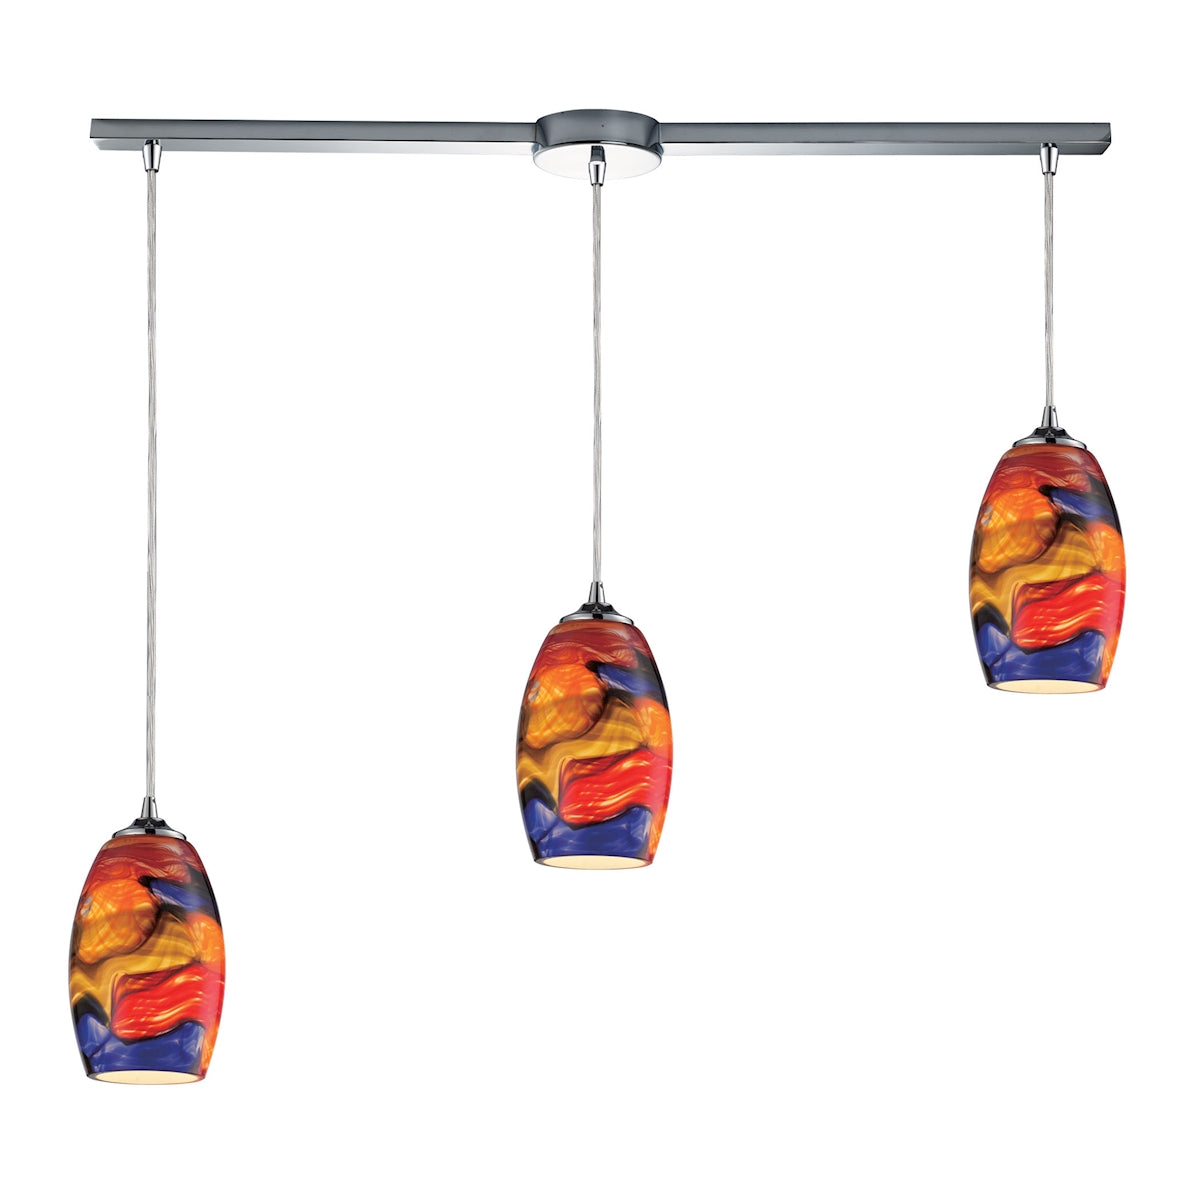 ELK Lighting 31339/3L Surrealist 3-Light Linear Pendant Fixture in Polished Chrome with Multi-colored Glass